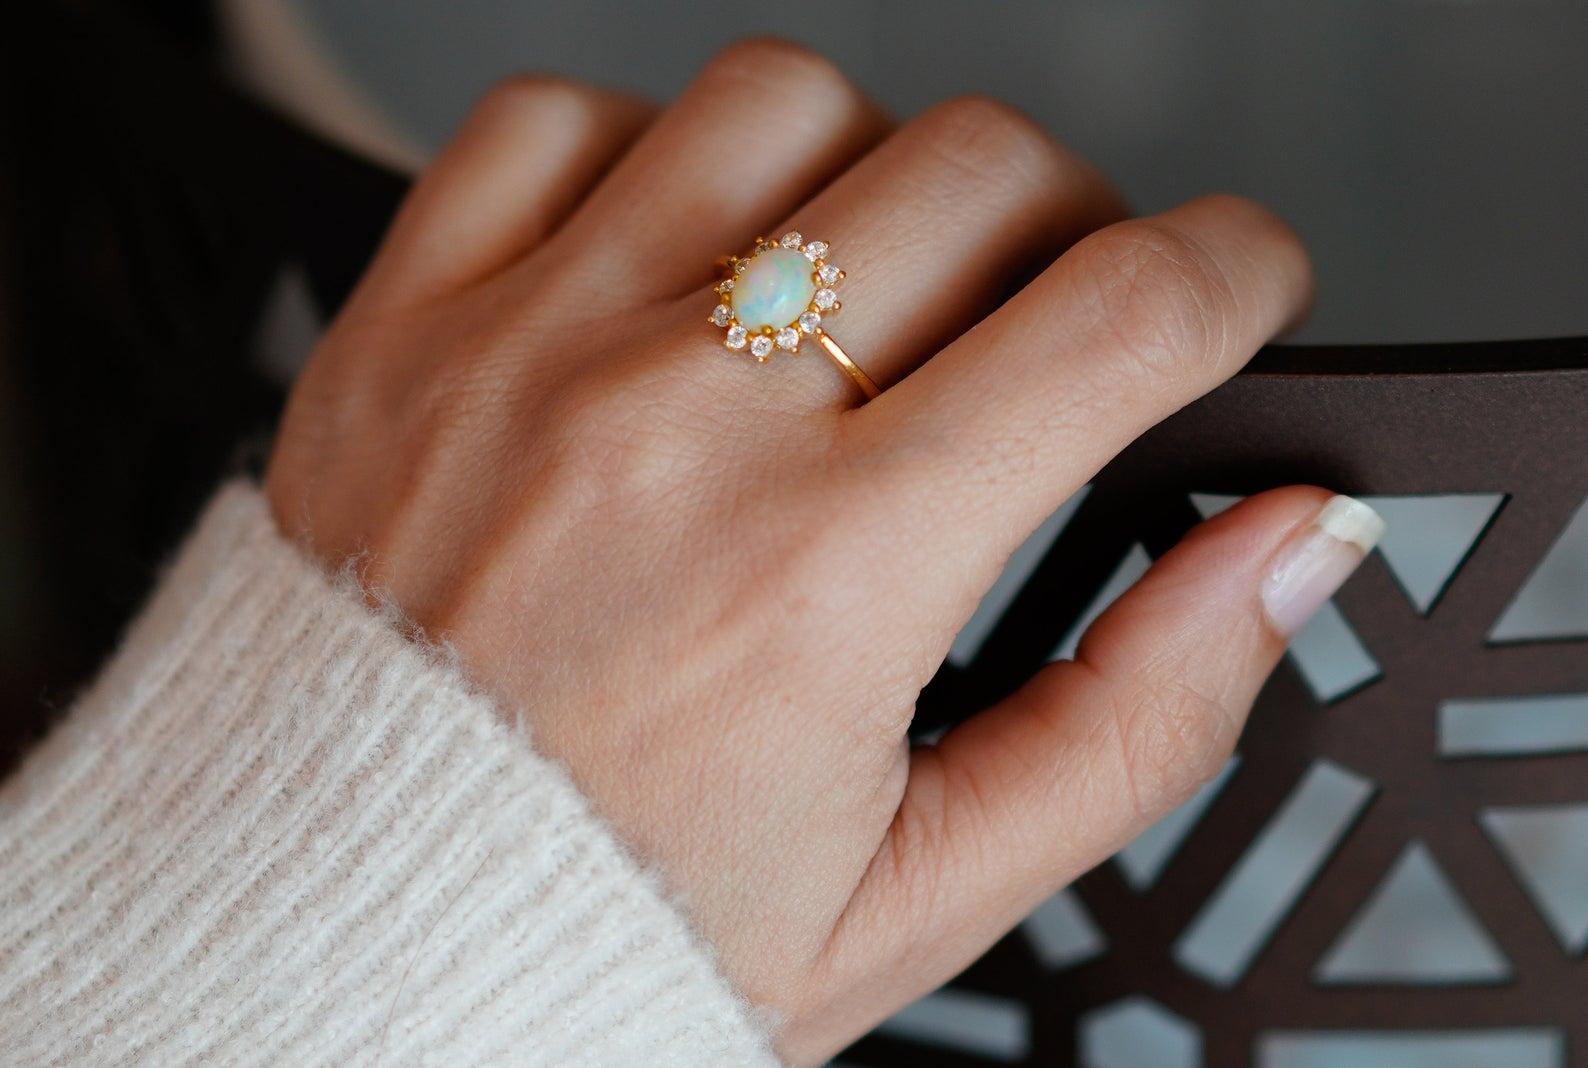 This Diamond Opal Engagement Ring is beautifully made with high-quality diamonds, it's perfect for wedding, engagement, or anniversary gift. This artisan handcrafted ring is one of a kind beauty that can be adorned with any dress and on any